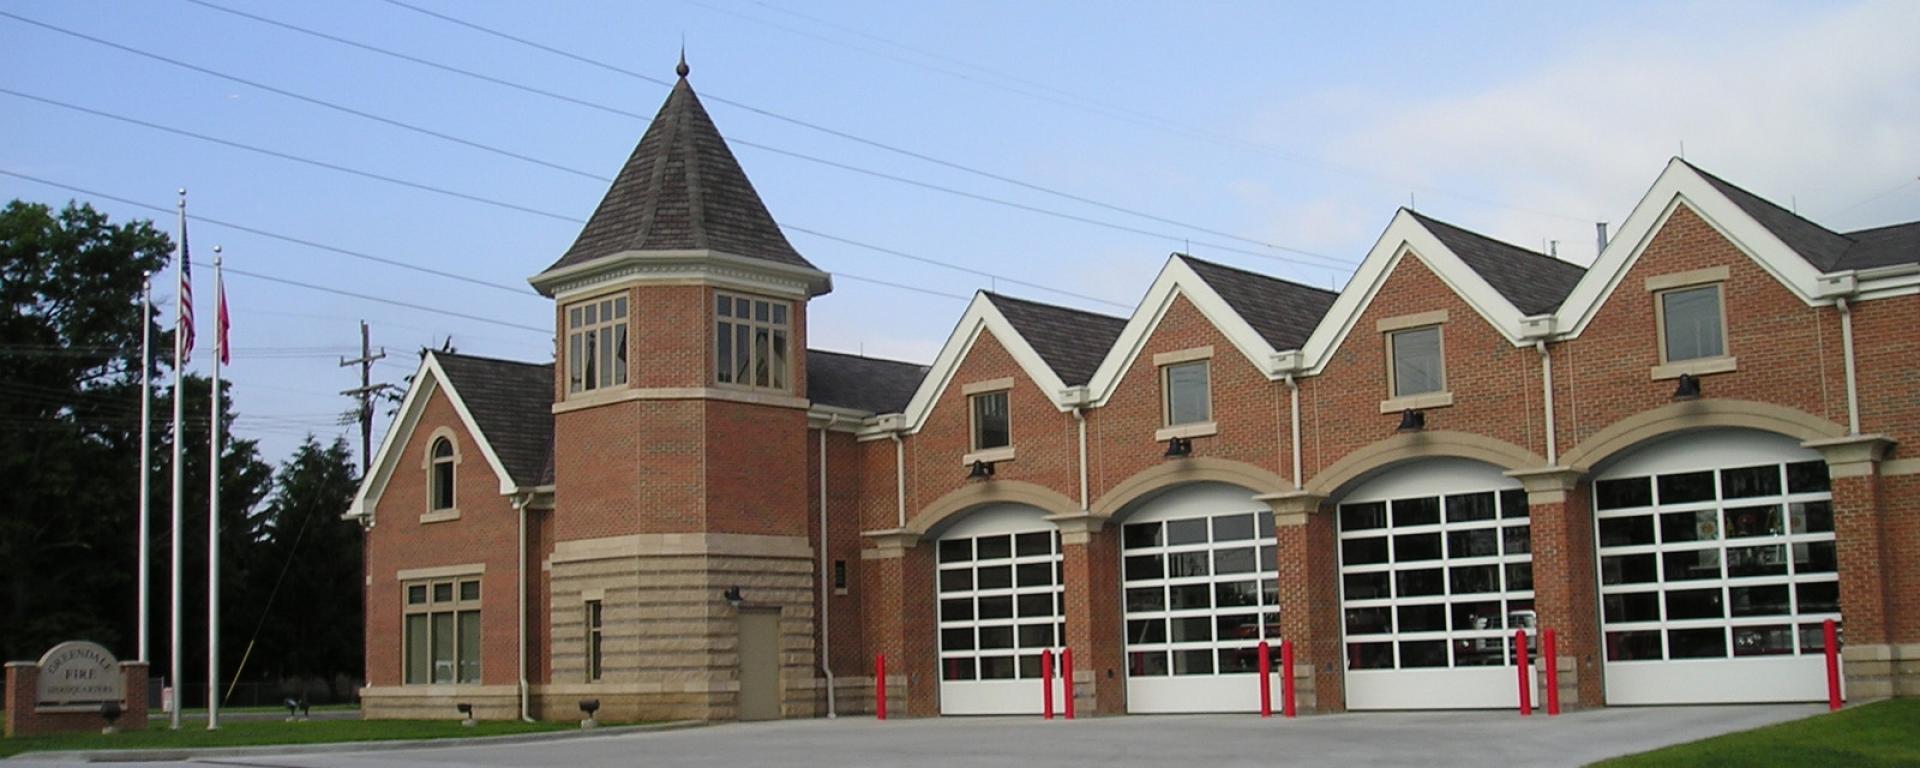 street view of firehouse front and garage doors